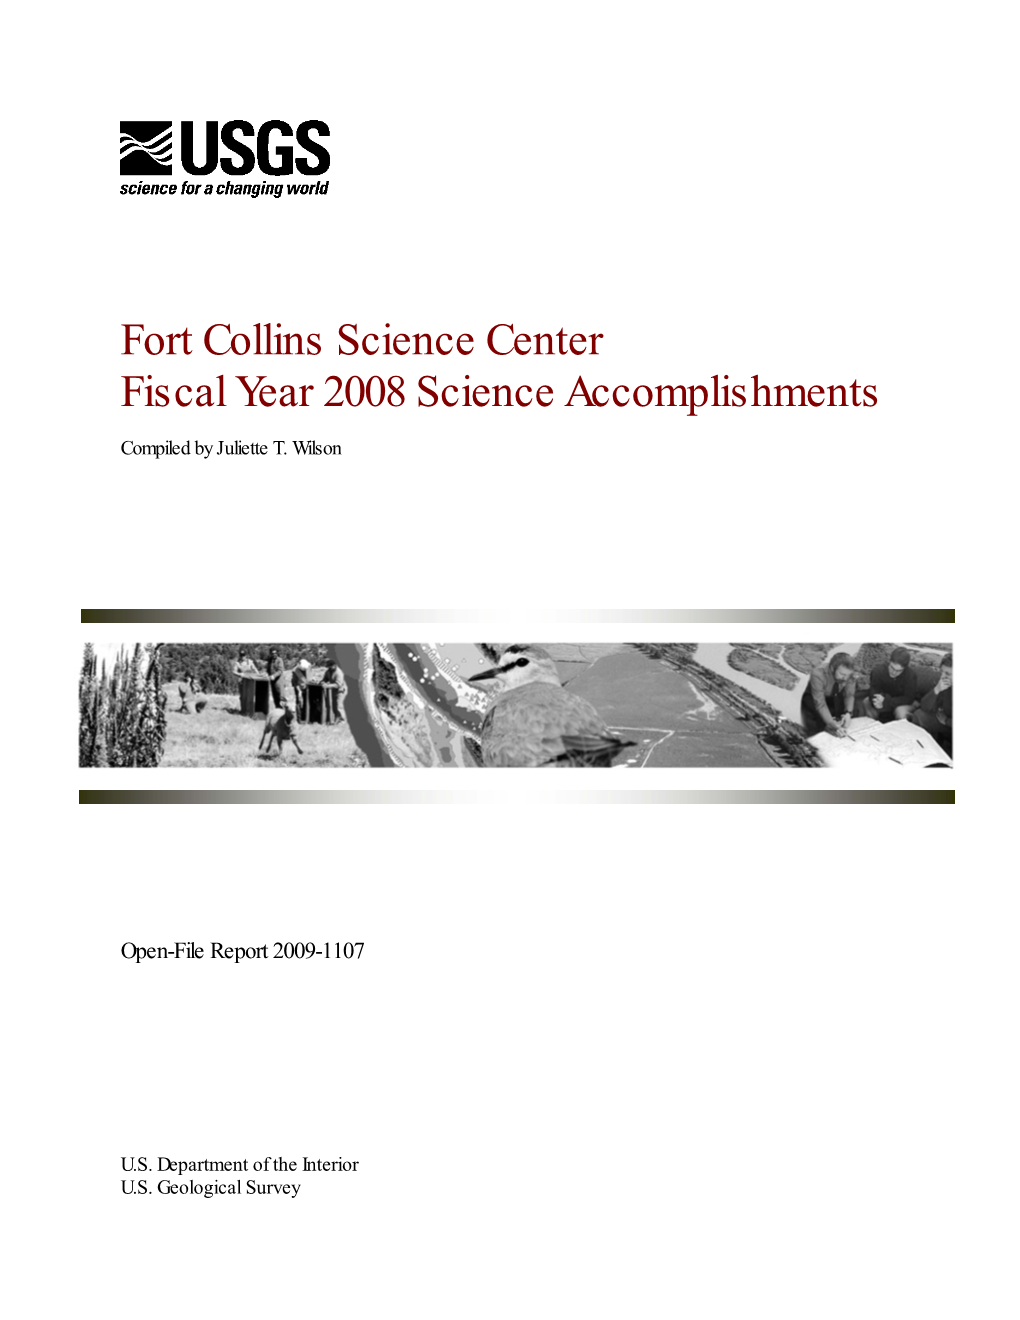 Fort Collins Science Center Fiscal Year 2008 Science Accomplishments